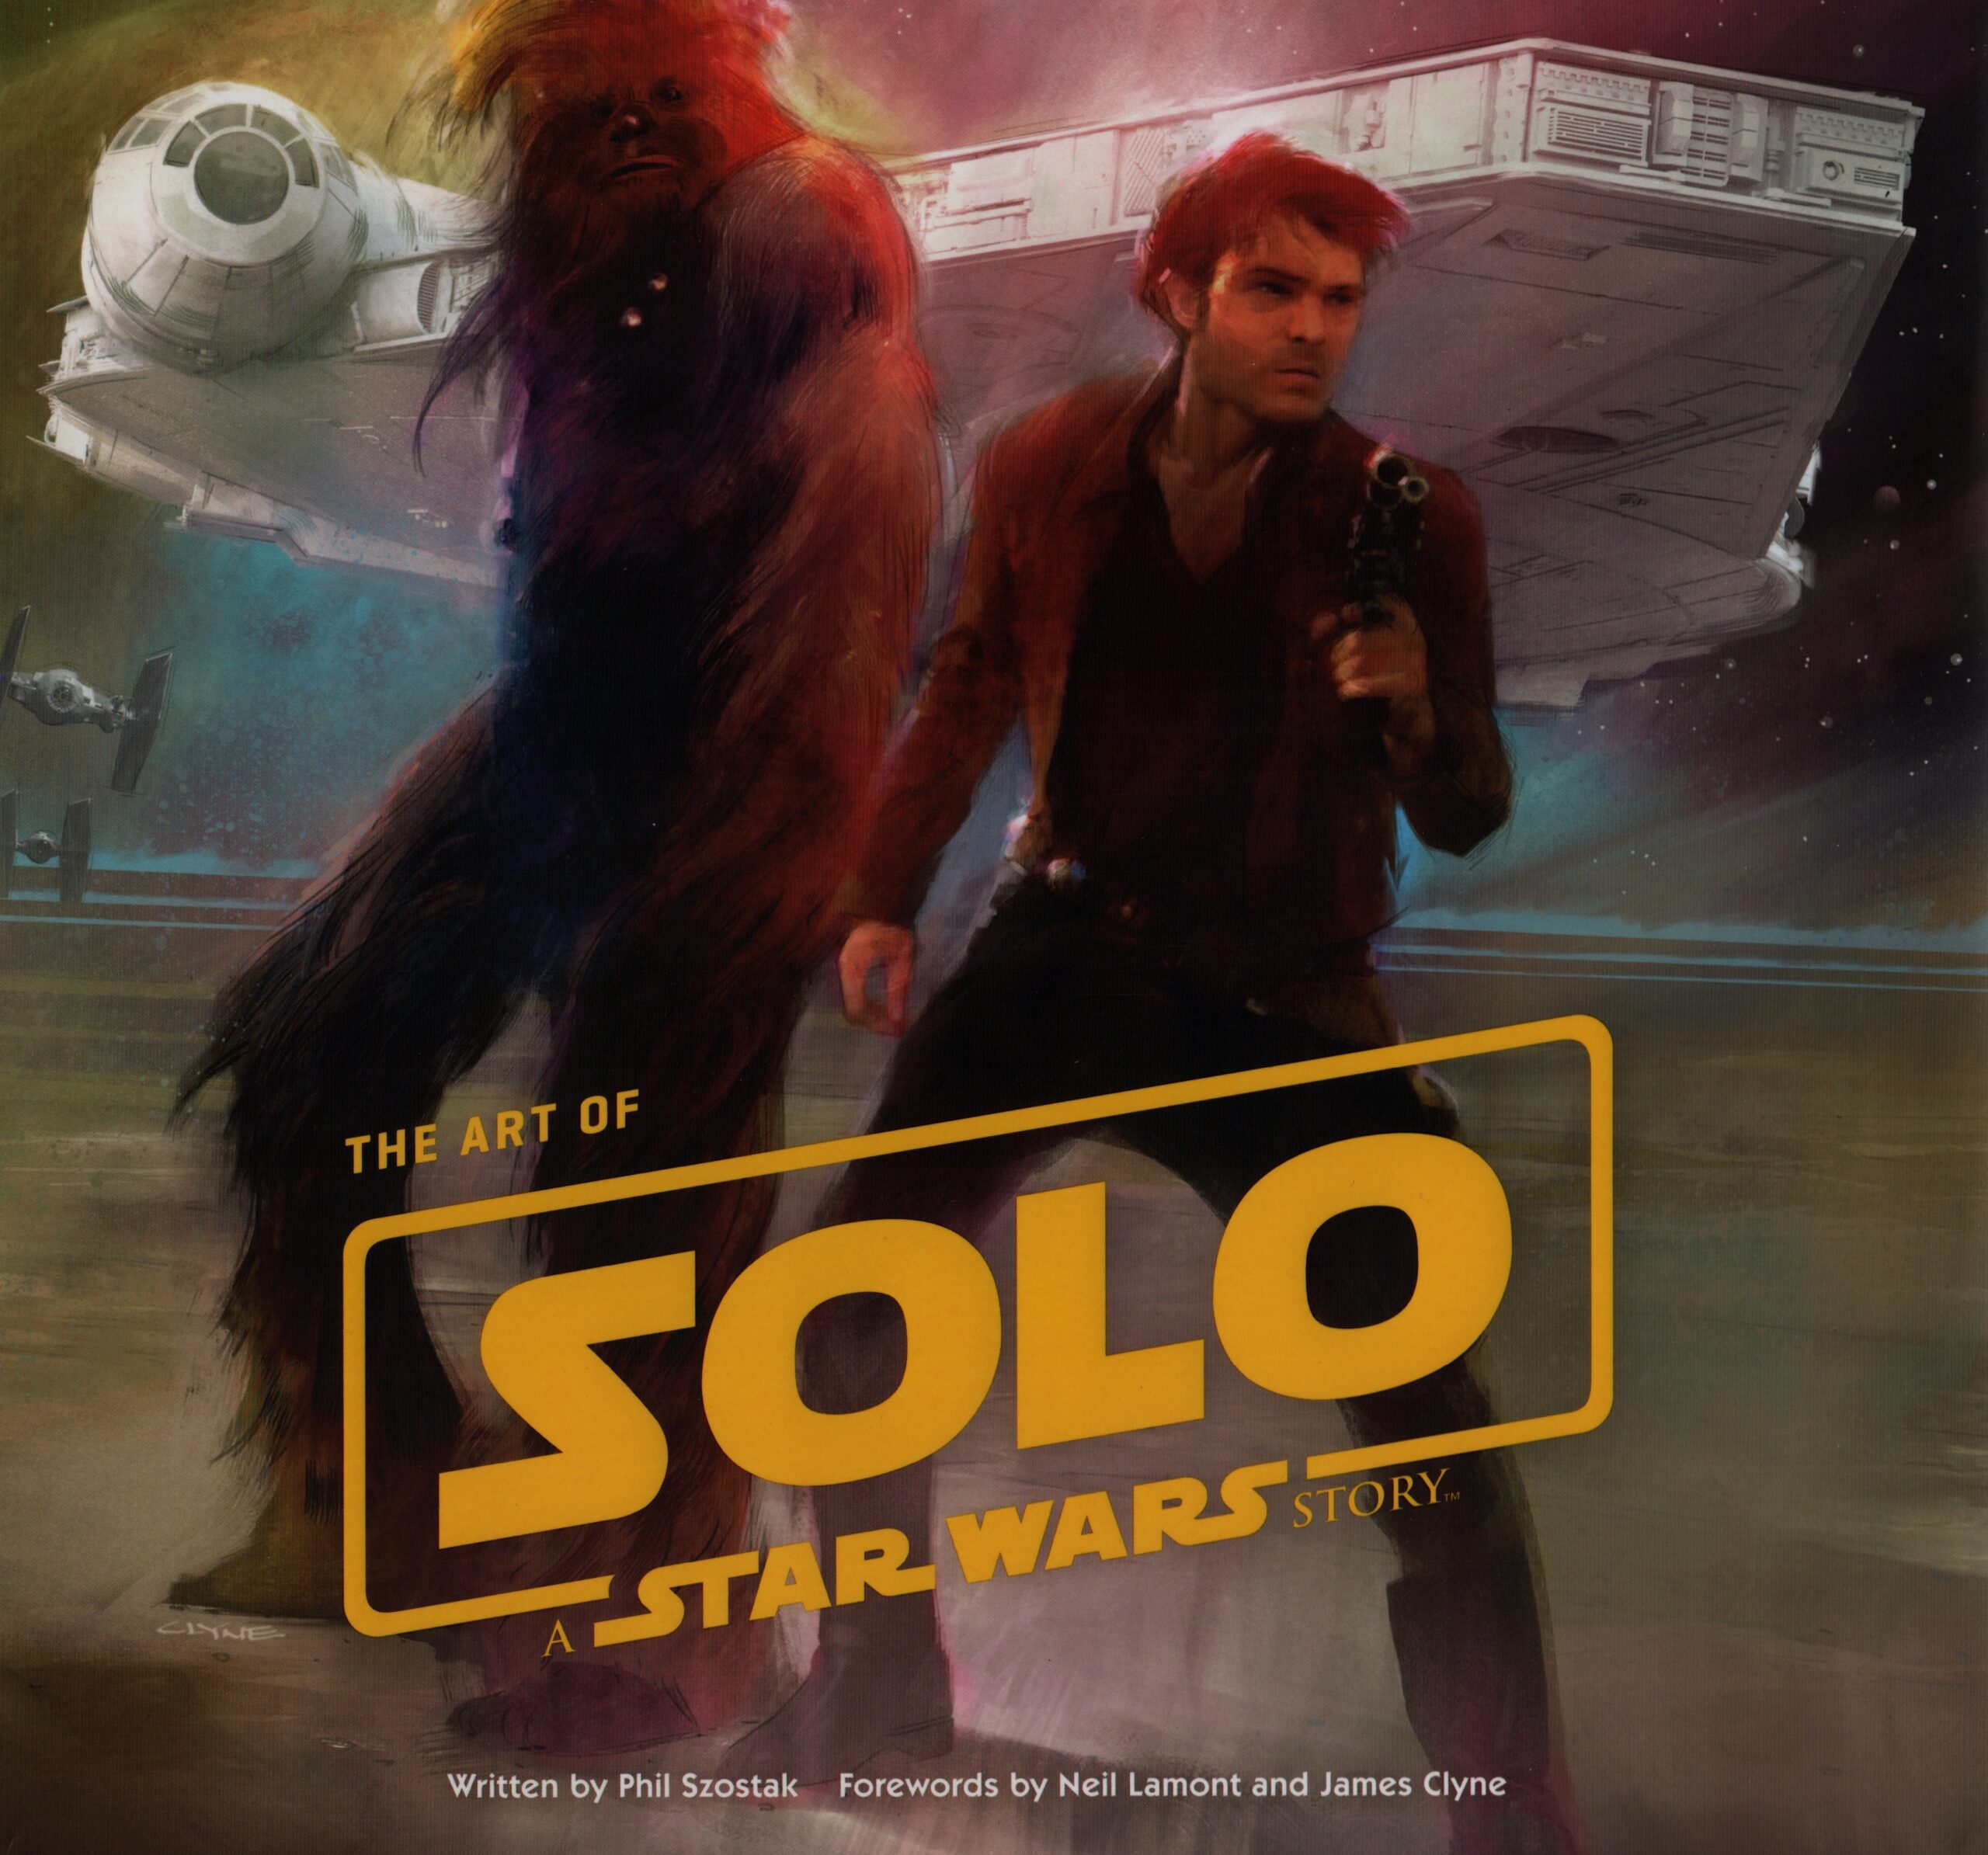 The Art of Solo – A Star Wars Story